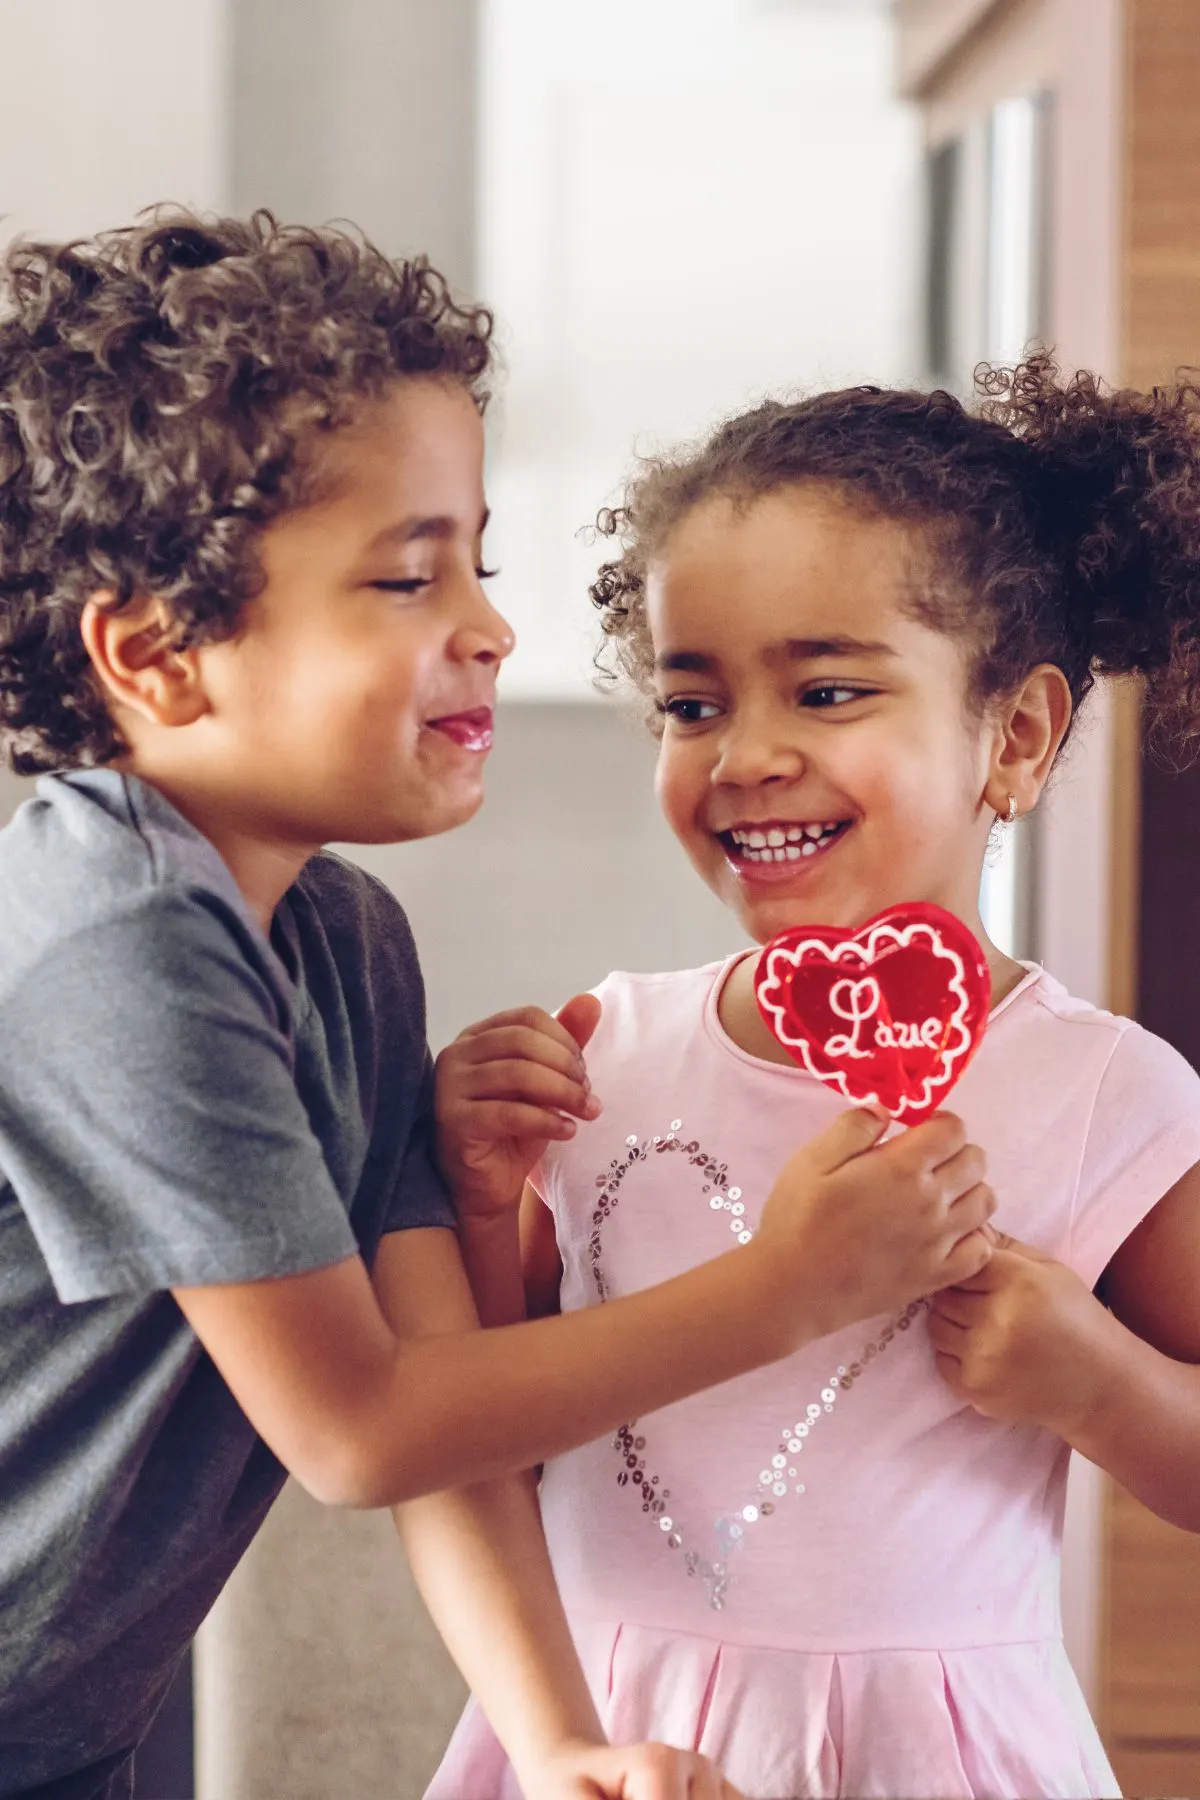 Smiling siblings hold a Valentine's Day sucker shaped like a heart.